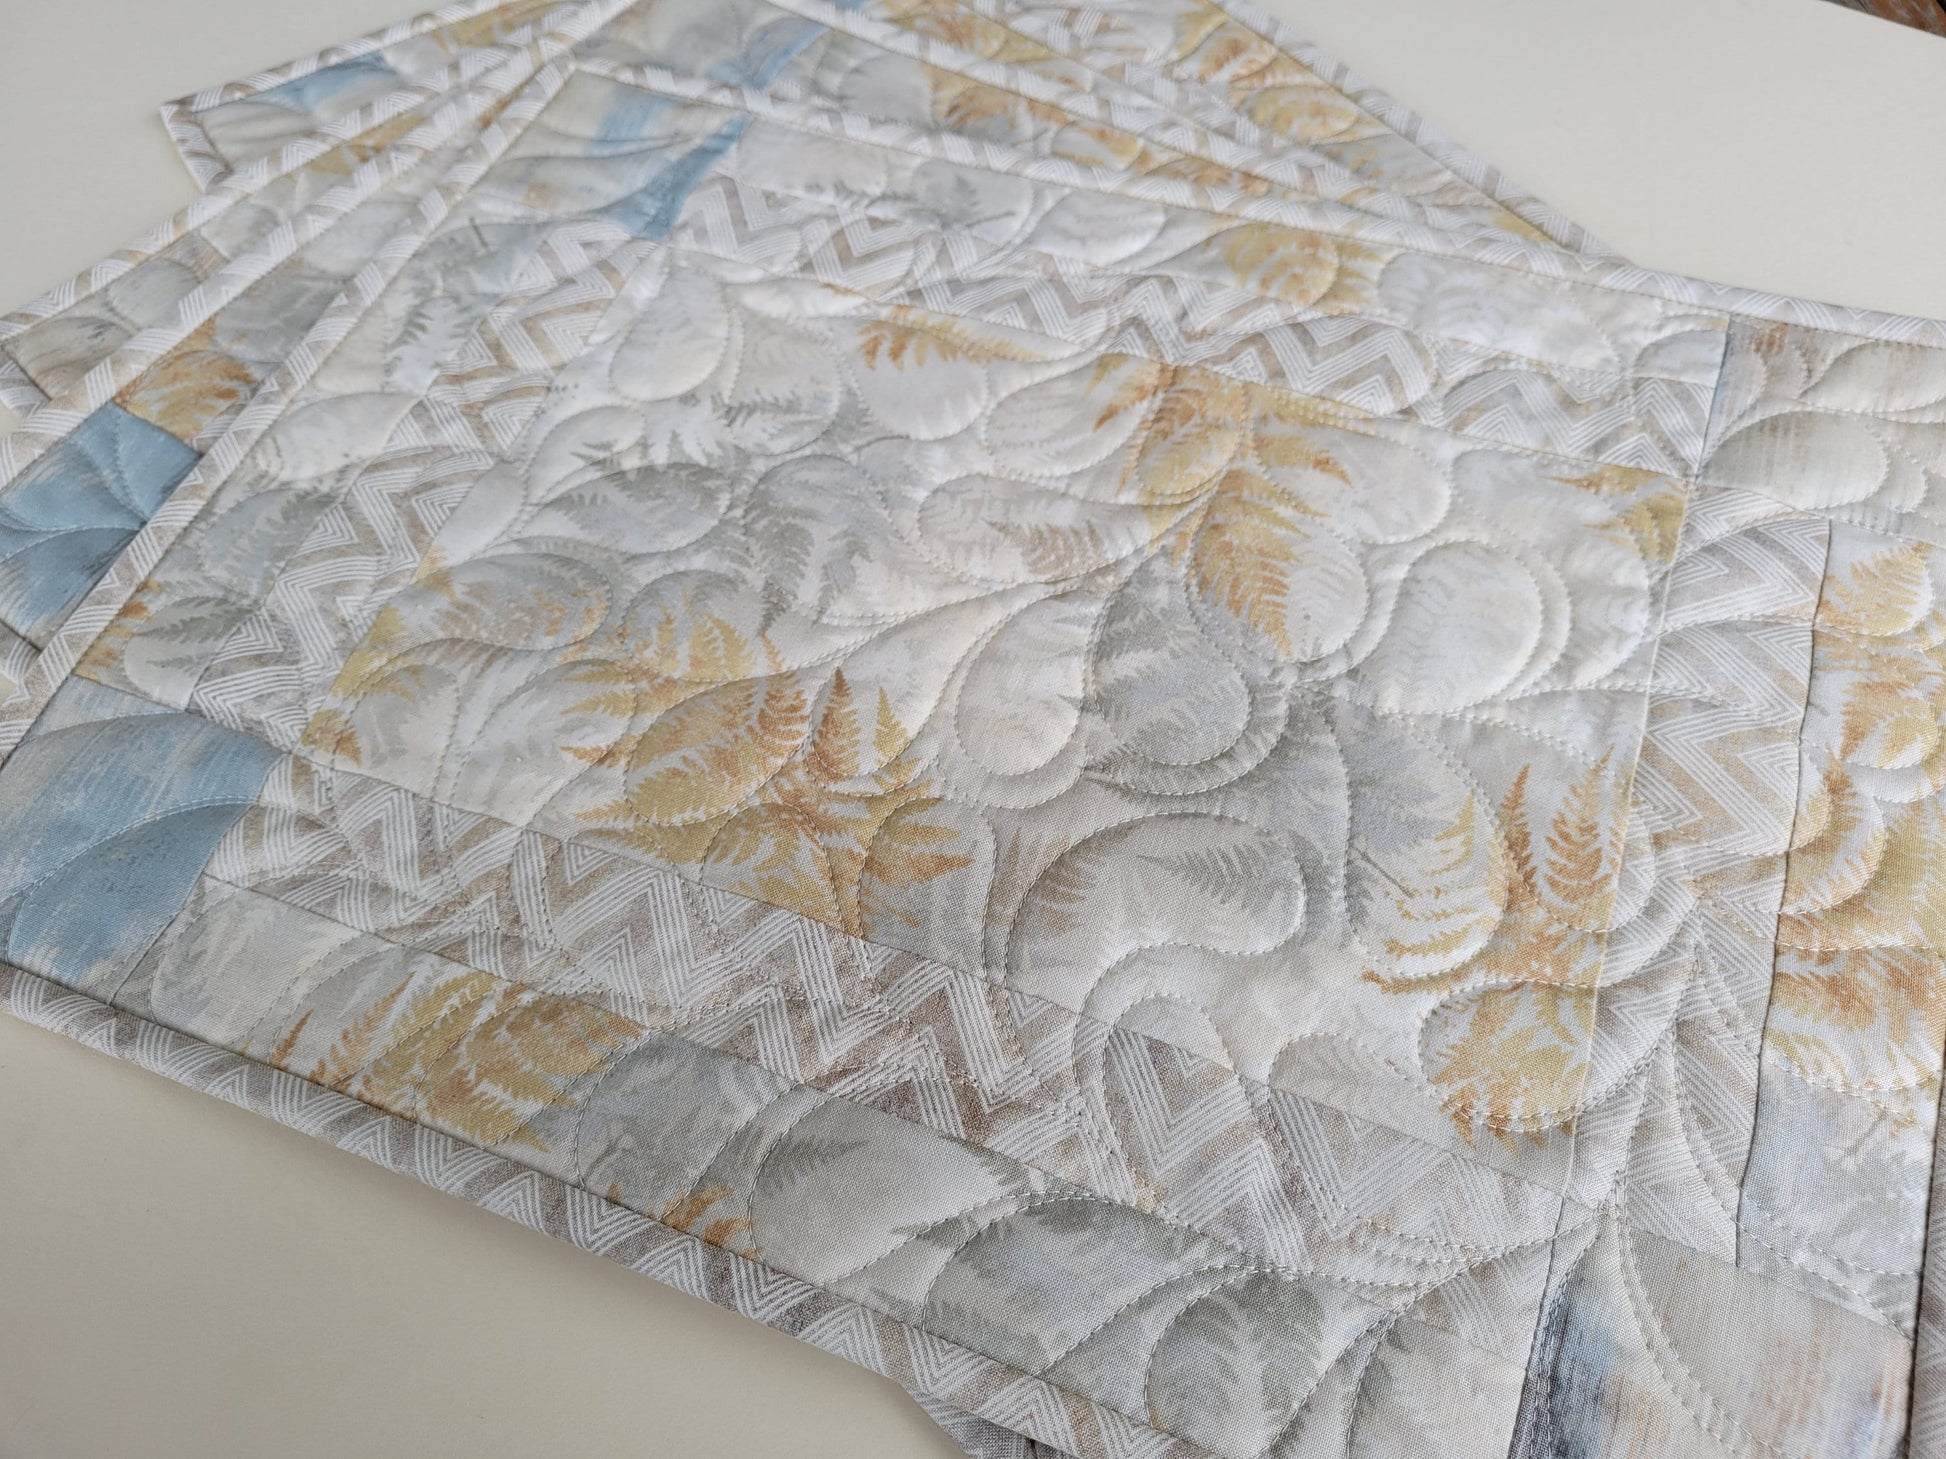 Neutral Quilted Placemats in Slate Blue, Beige and Gray with Modern Abstract Ferns